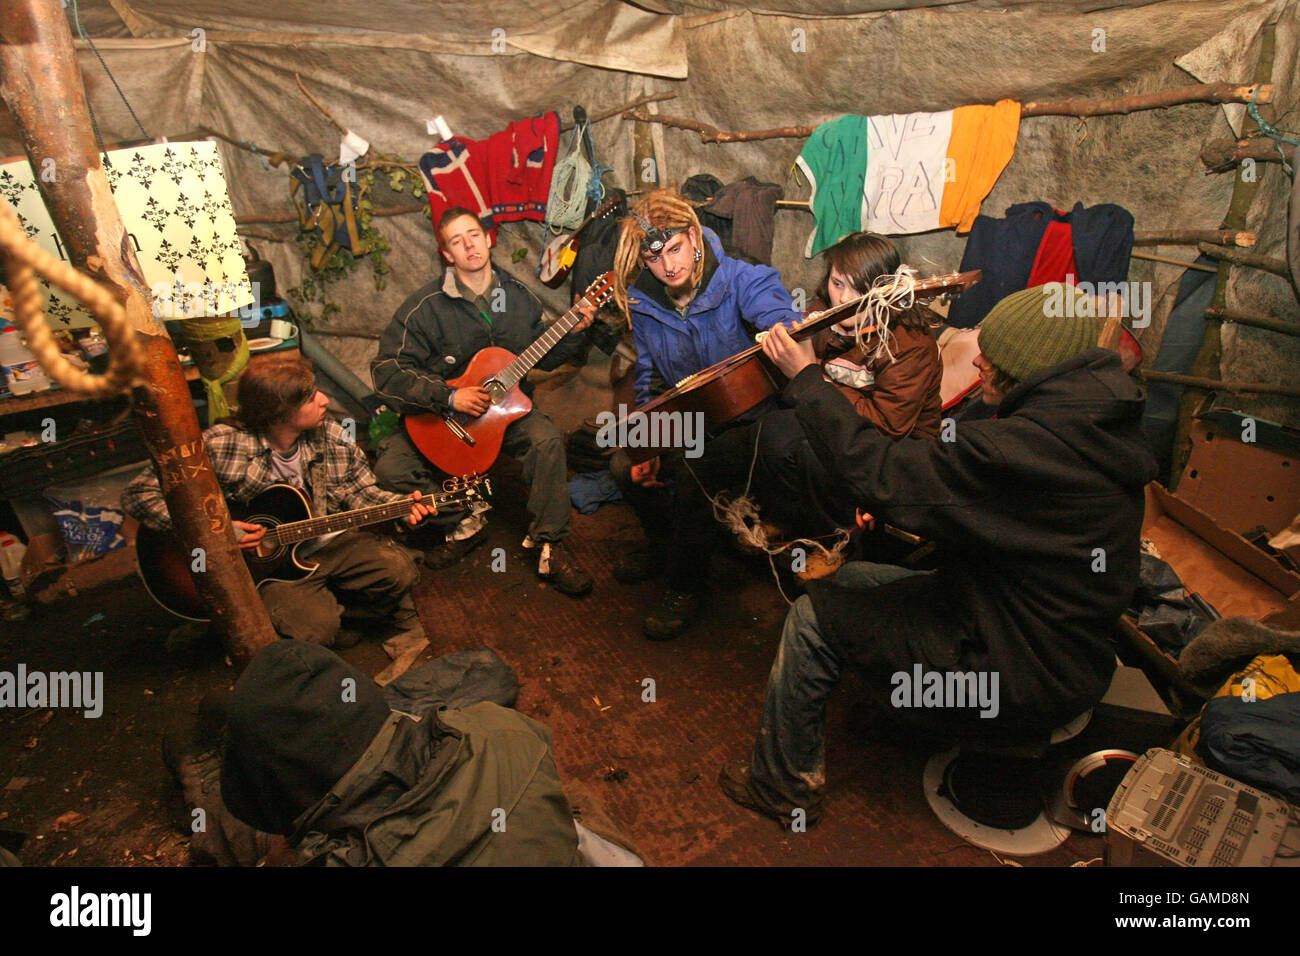 Members of the Rath Lugh Direct Action group play music in a tent they have named 'the round house' at the M3 Motorway site at Rath Lugh in Co Meath. Psychology graduate Lisa Feeney, known as Squeak, barricaded herself inside a chamber built at the bottom of a 33ft tunnel in a bid to delay work today on a controversial section of a motorway . Stock Photo